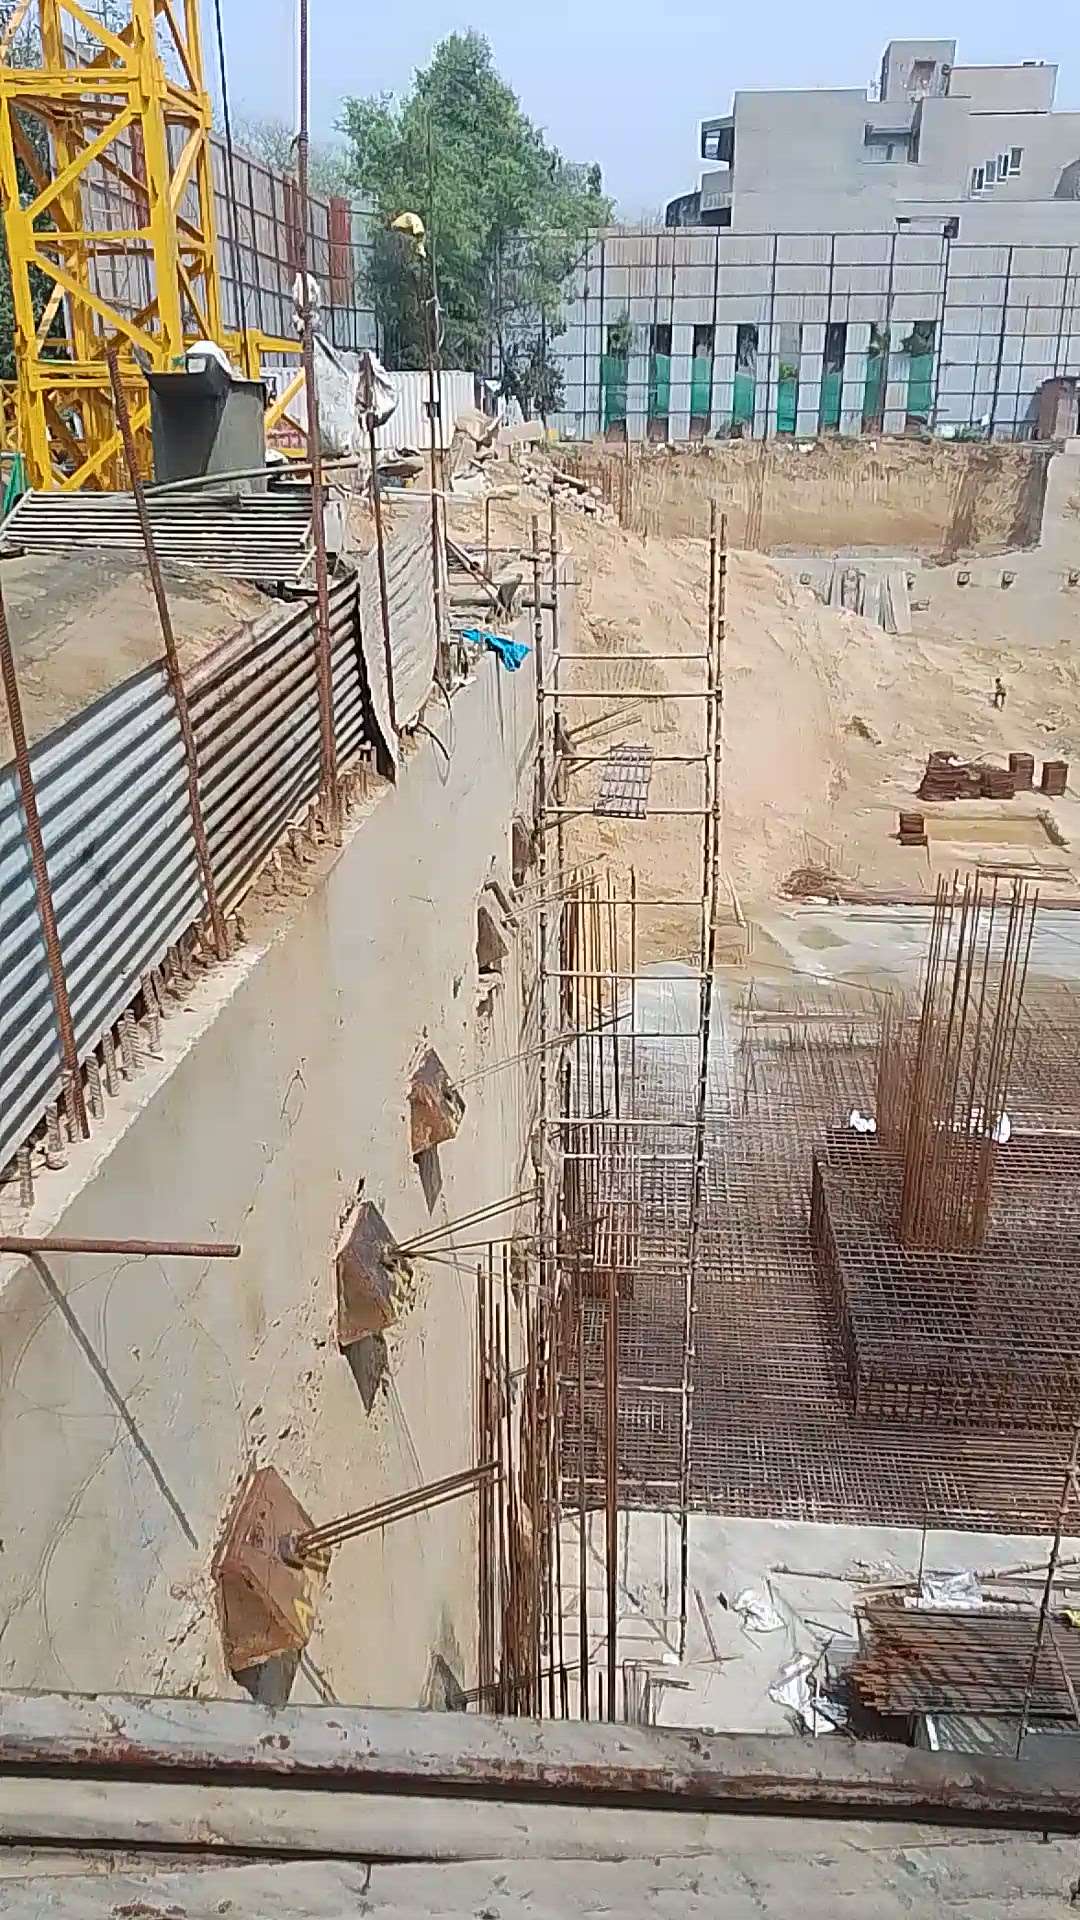 Institute of Constitutional and Parliamentary Studies
Central Vista project,Chanakyapuri
Raft casting
 #indiagate
#newdelhi 
 #constructionsite